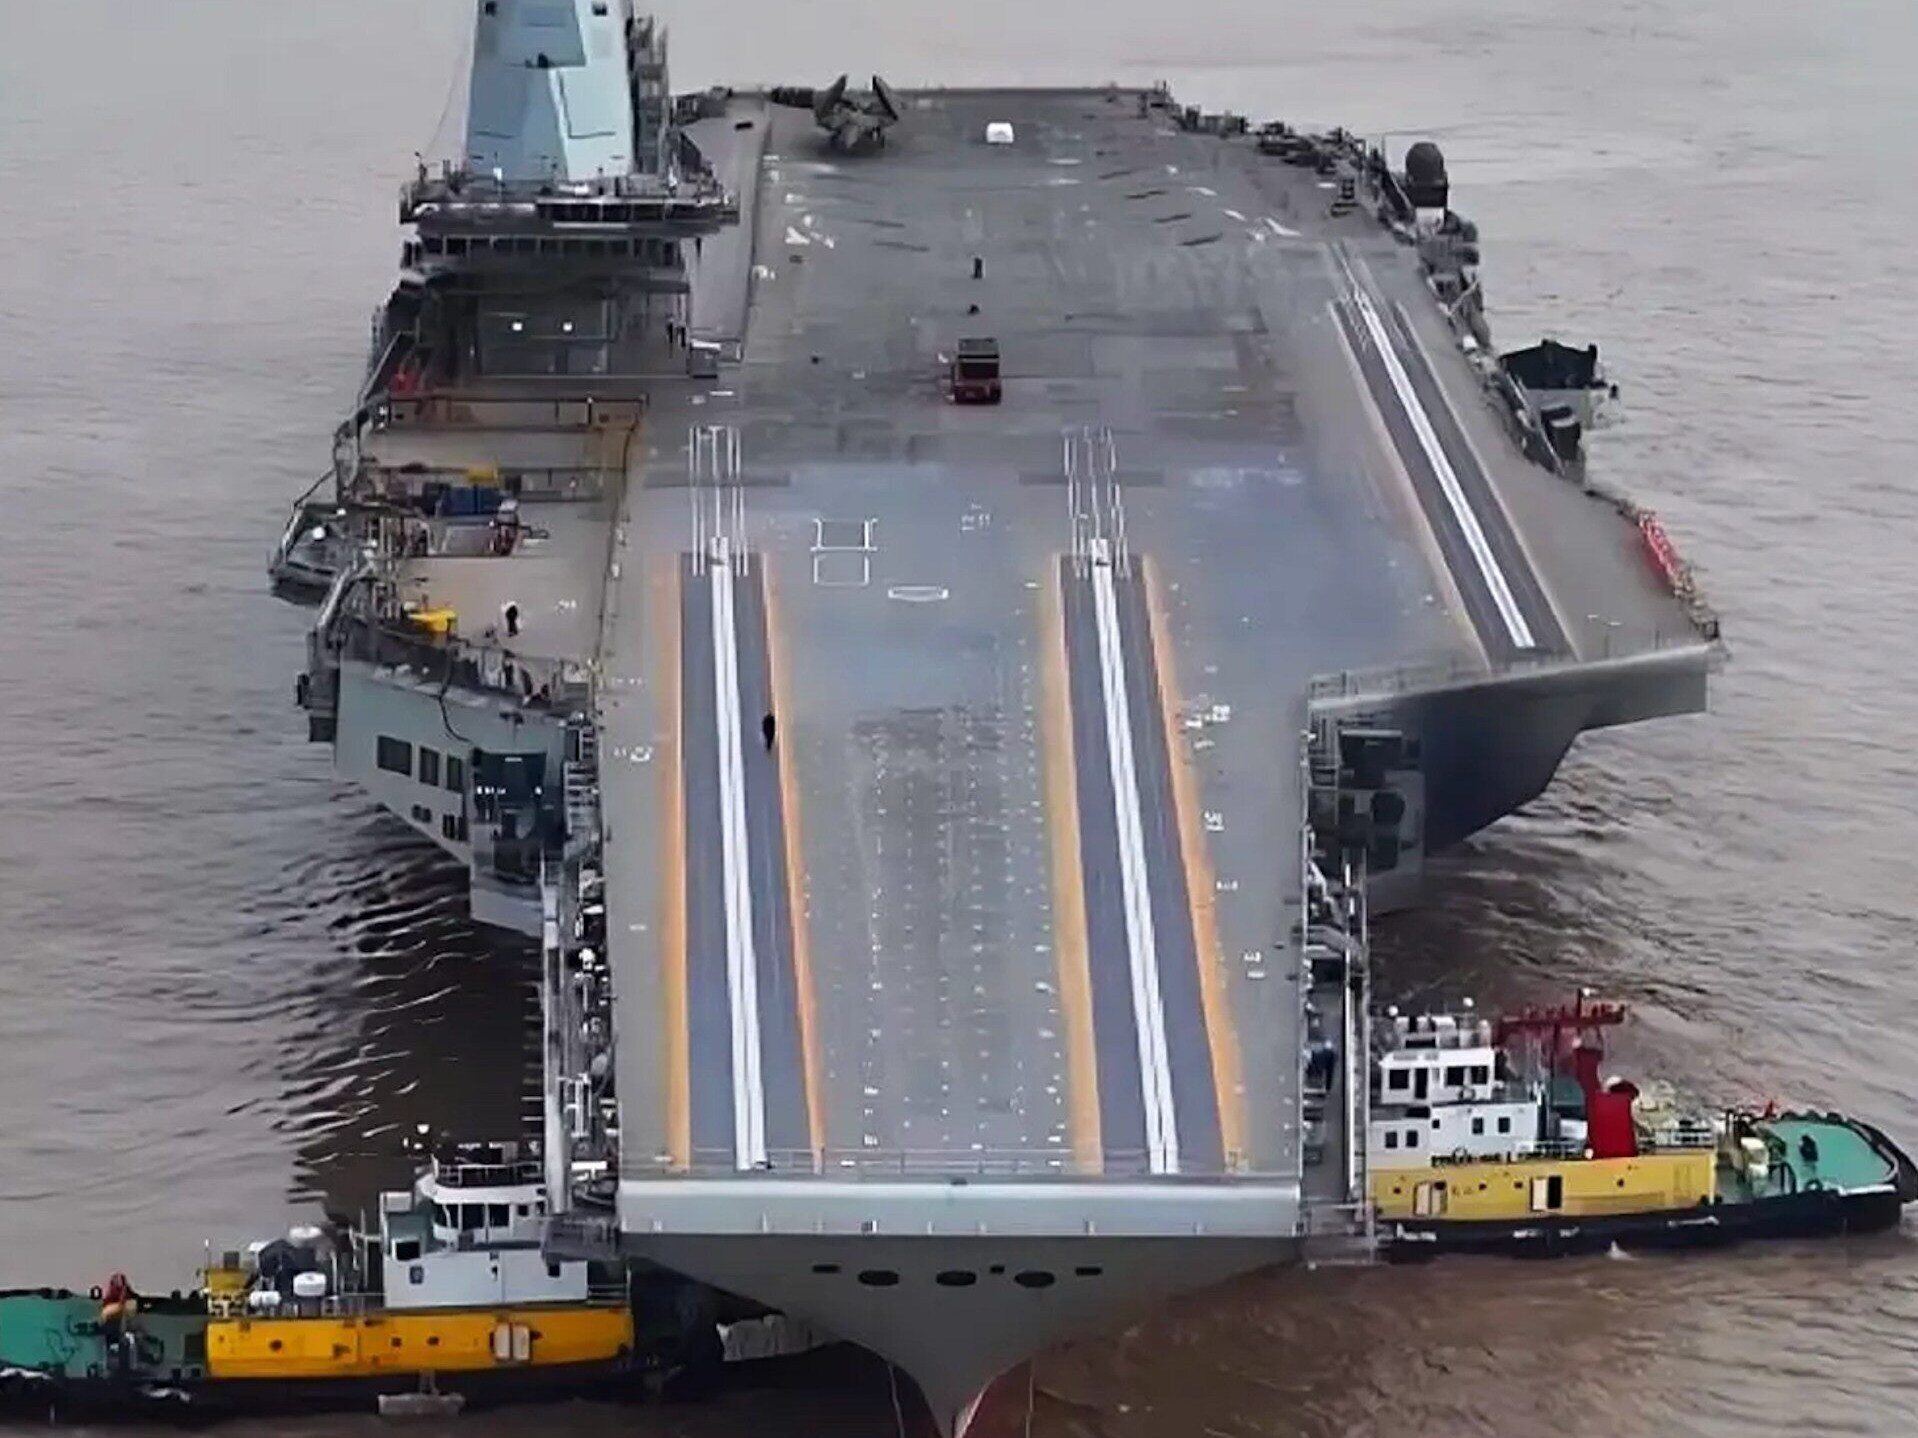 This is what Fujian looks like.  China's most modern aircraft carrier